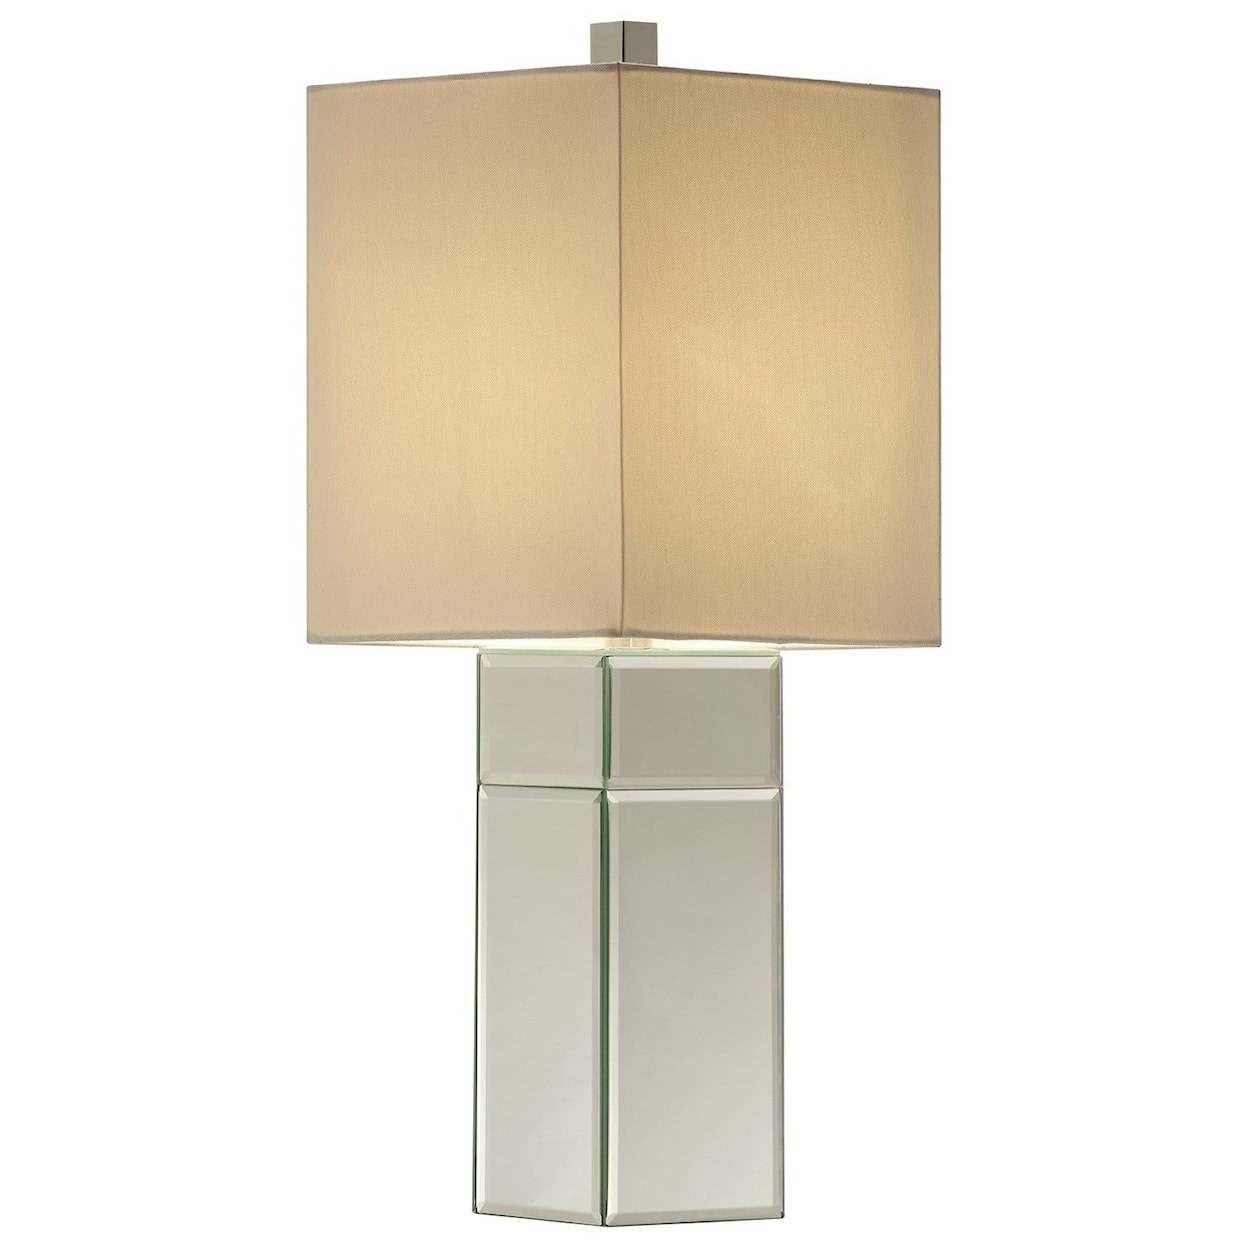 Crestview Collection Lighting Lucas Table Lamp